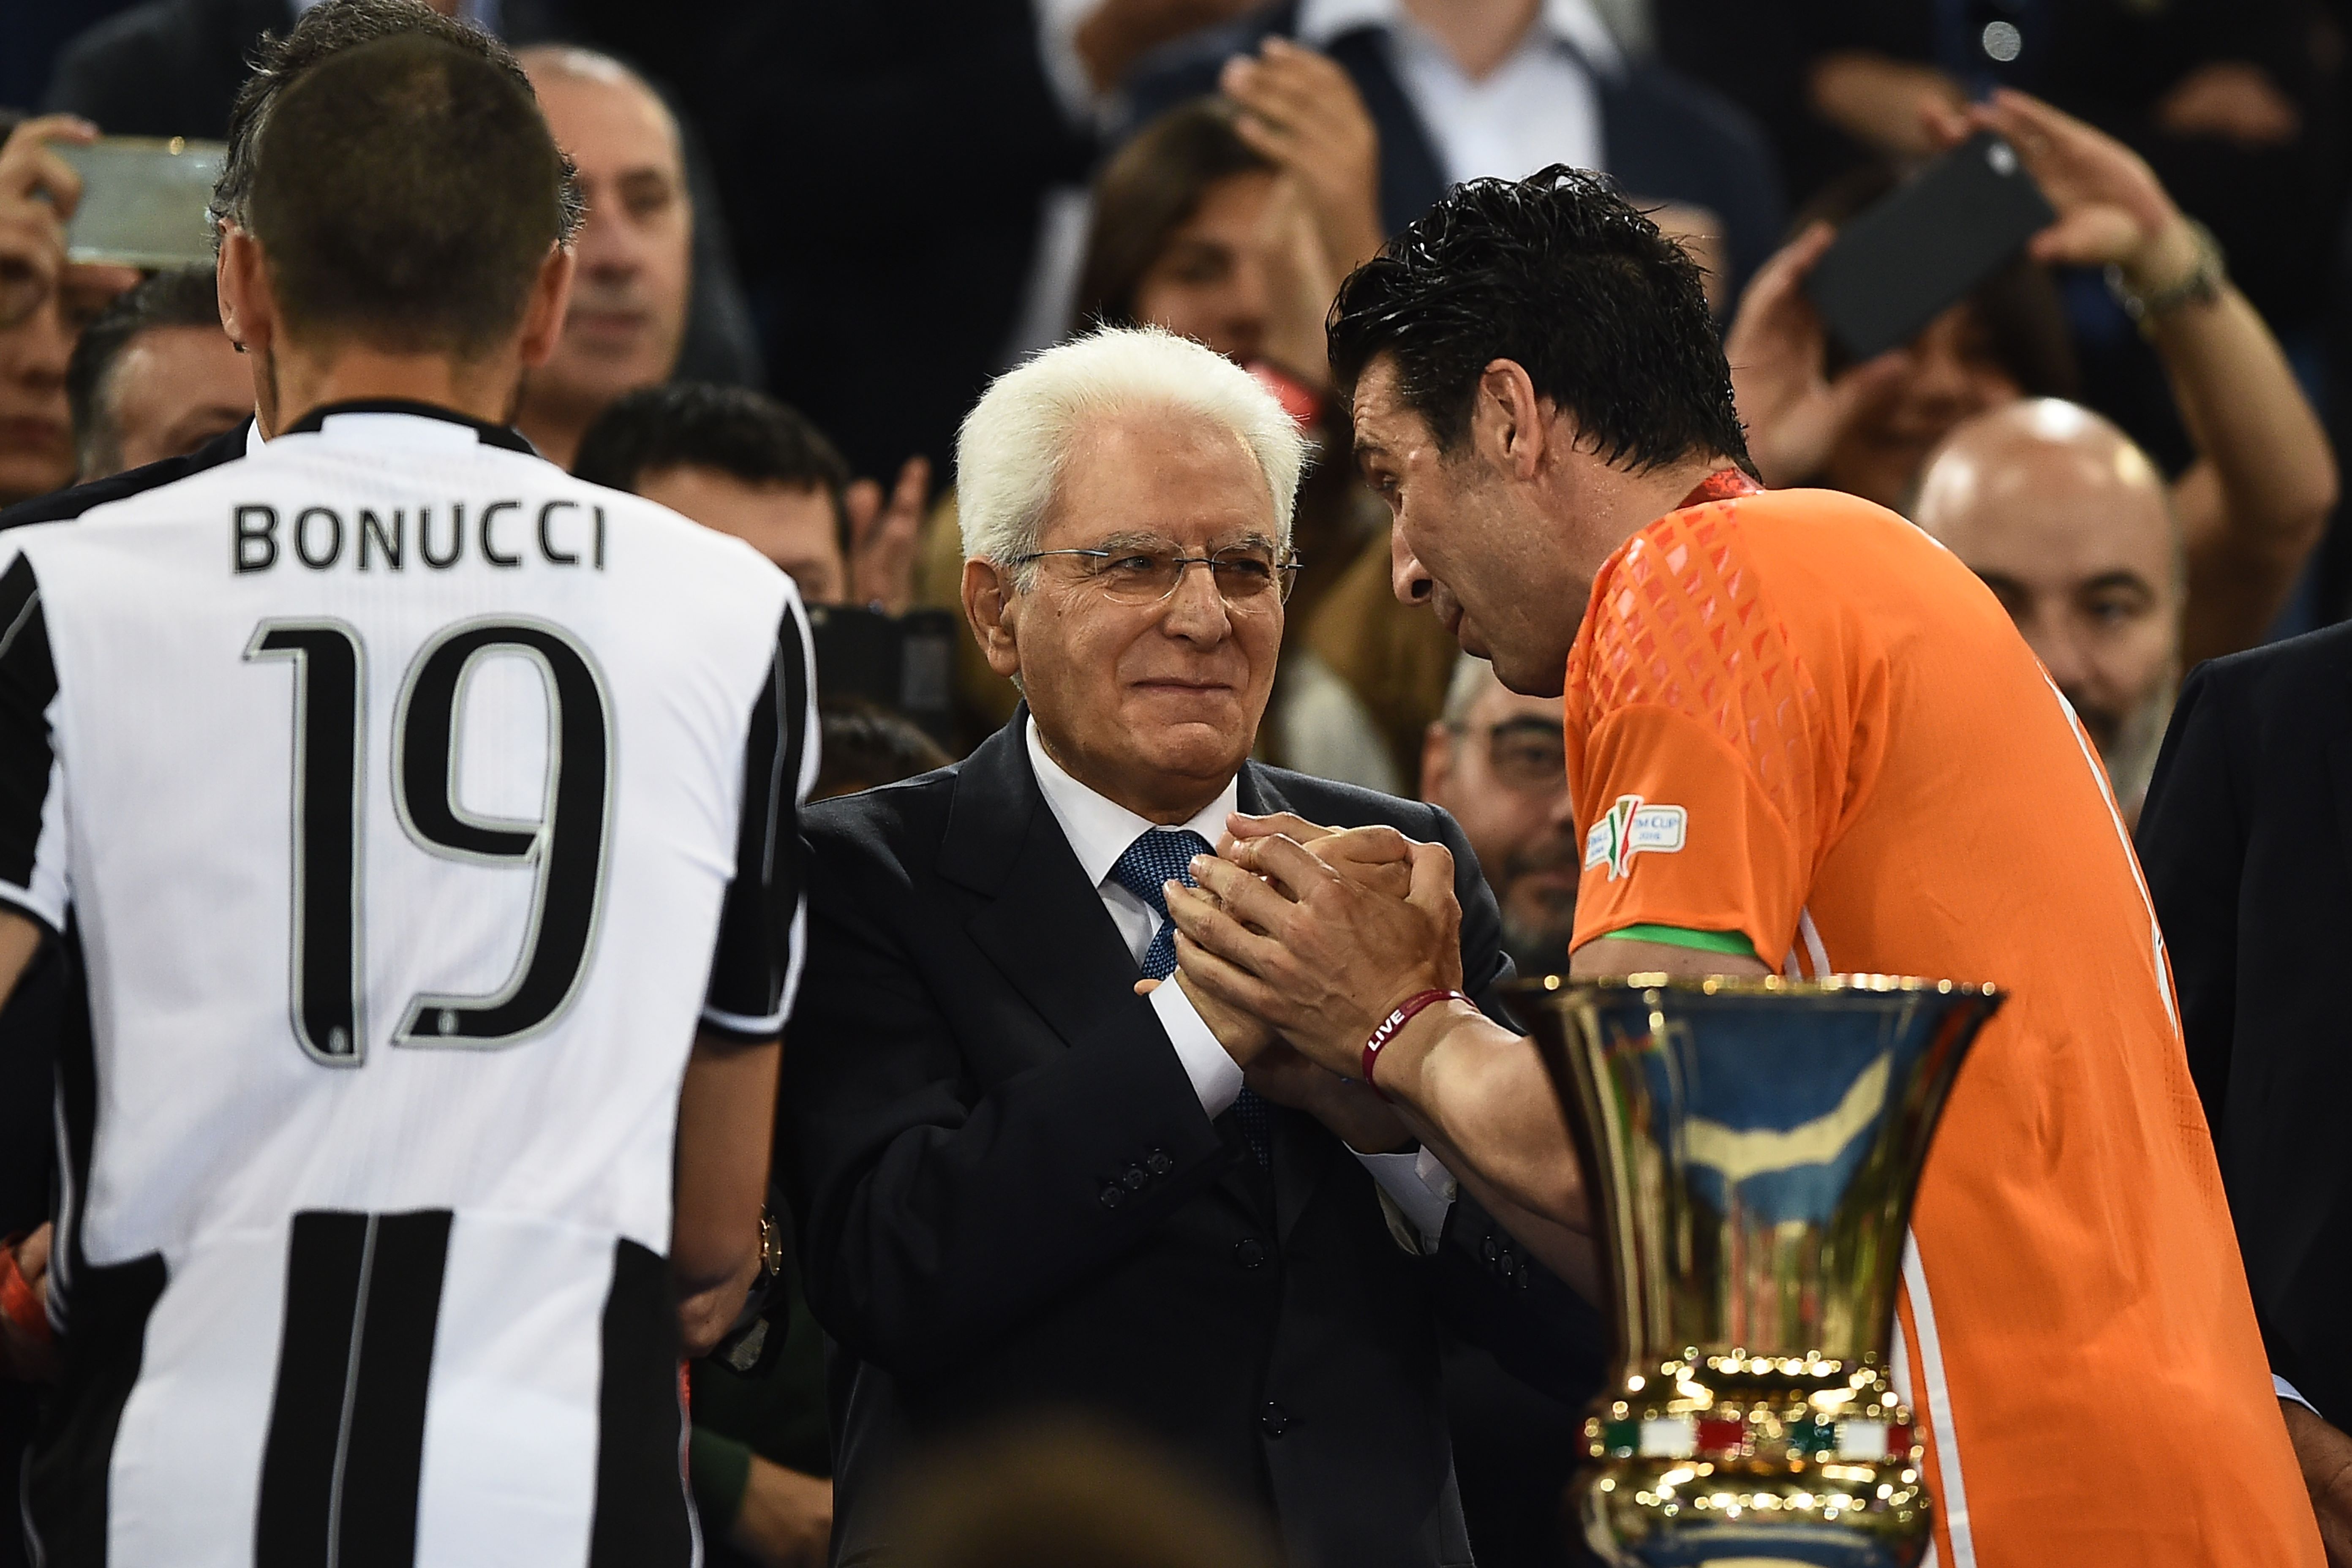 Juventus beat AC Milan to win Italian Cup, complete double